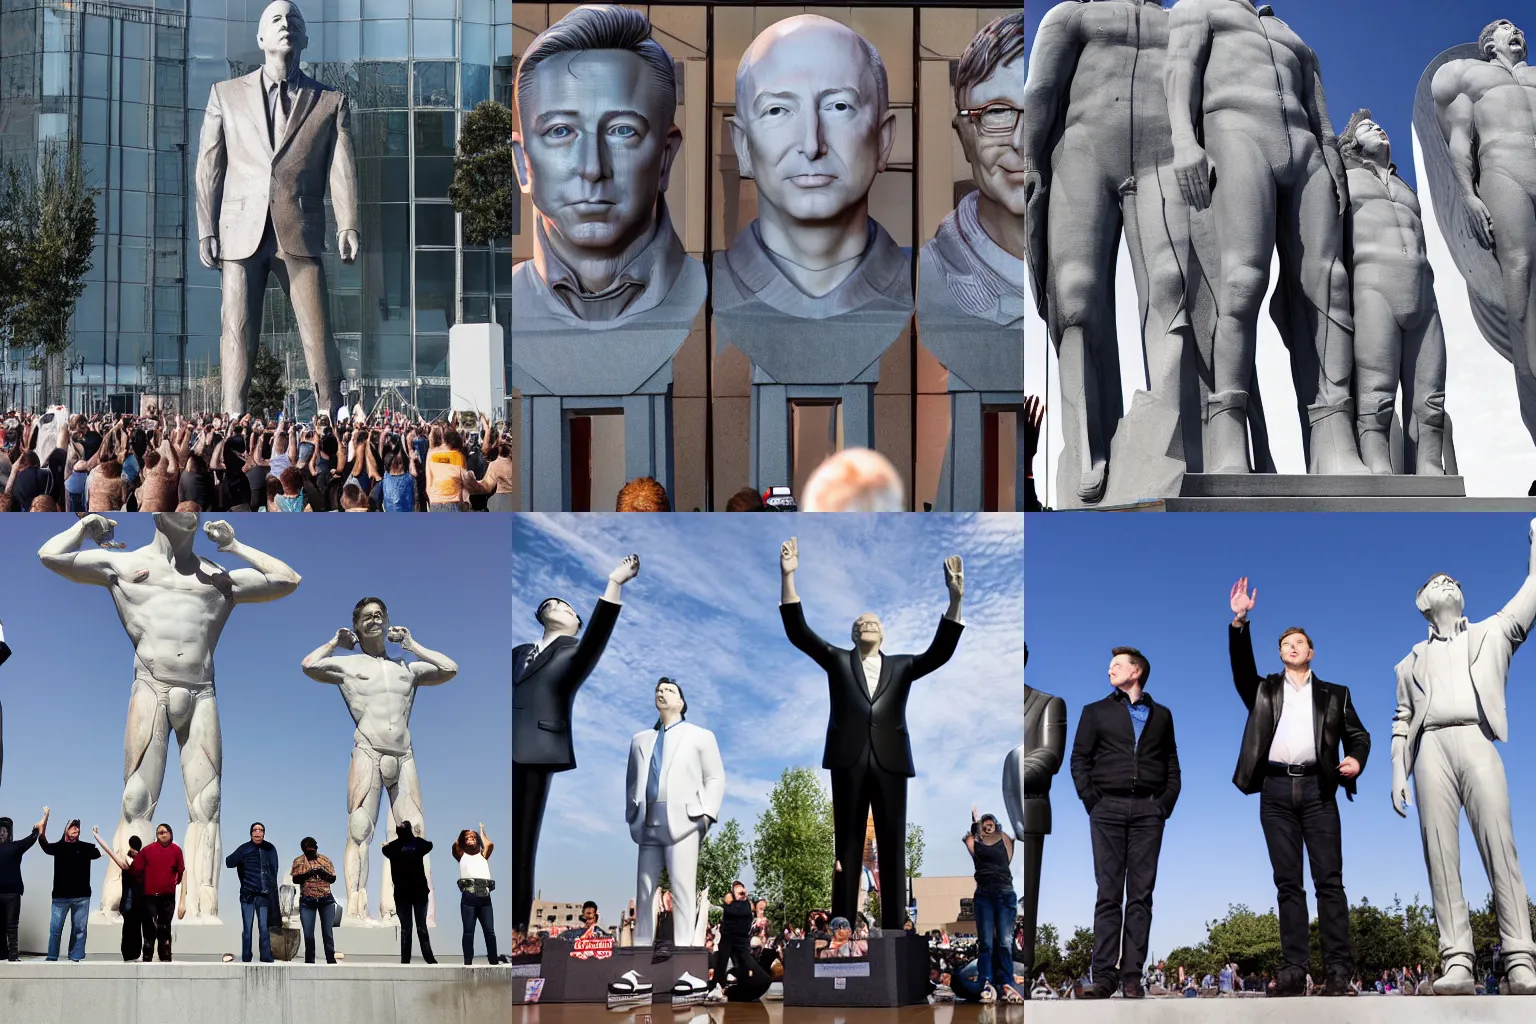 Prompt: giant statues of Jeff Bezos, Elon Musk, and Bill Gates, a crowd of people kneeling worshipping the statues, 8k photographs,